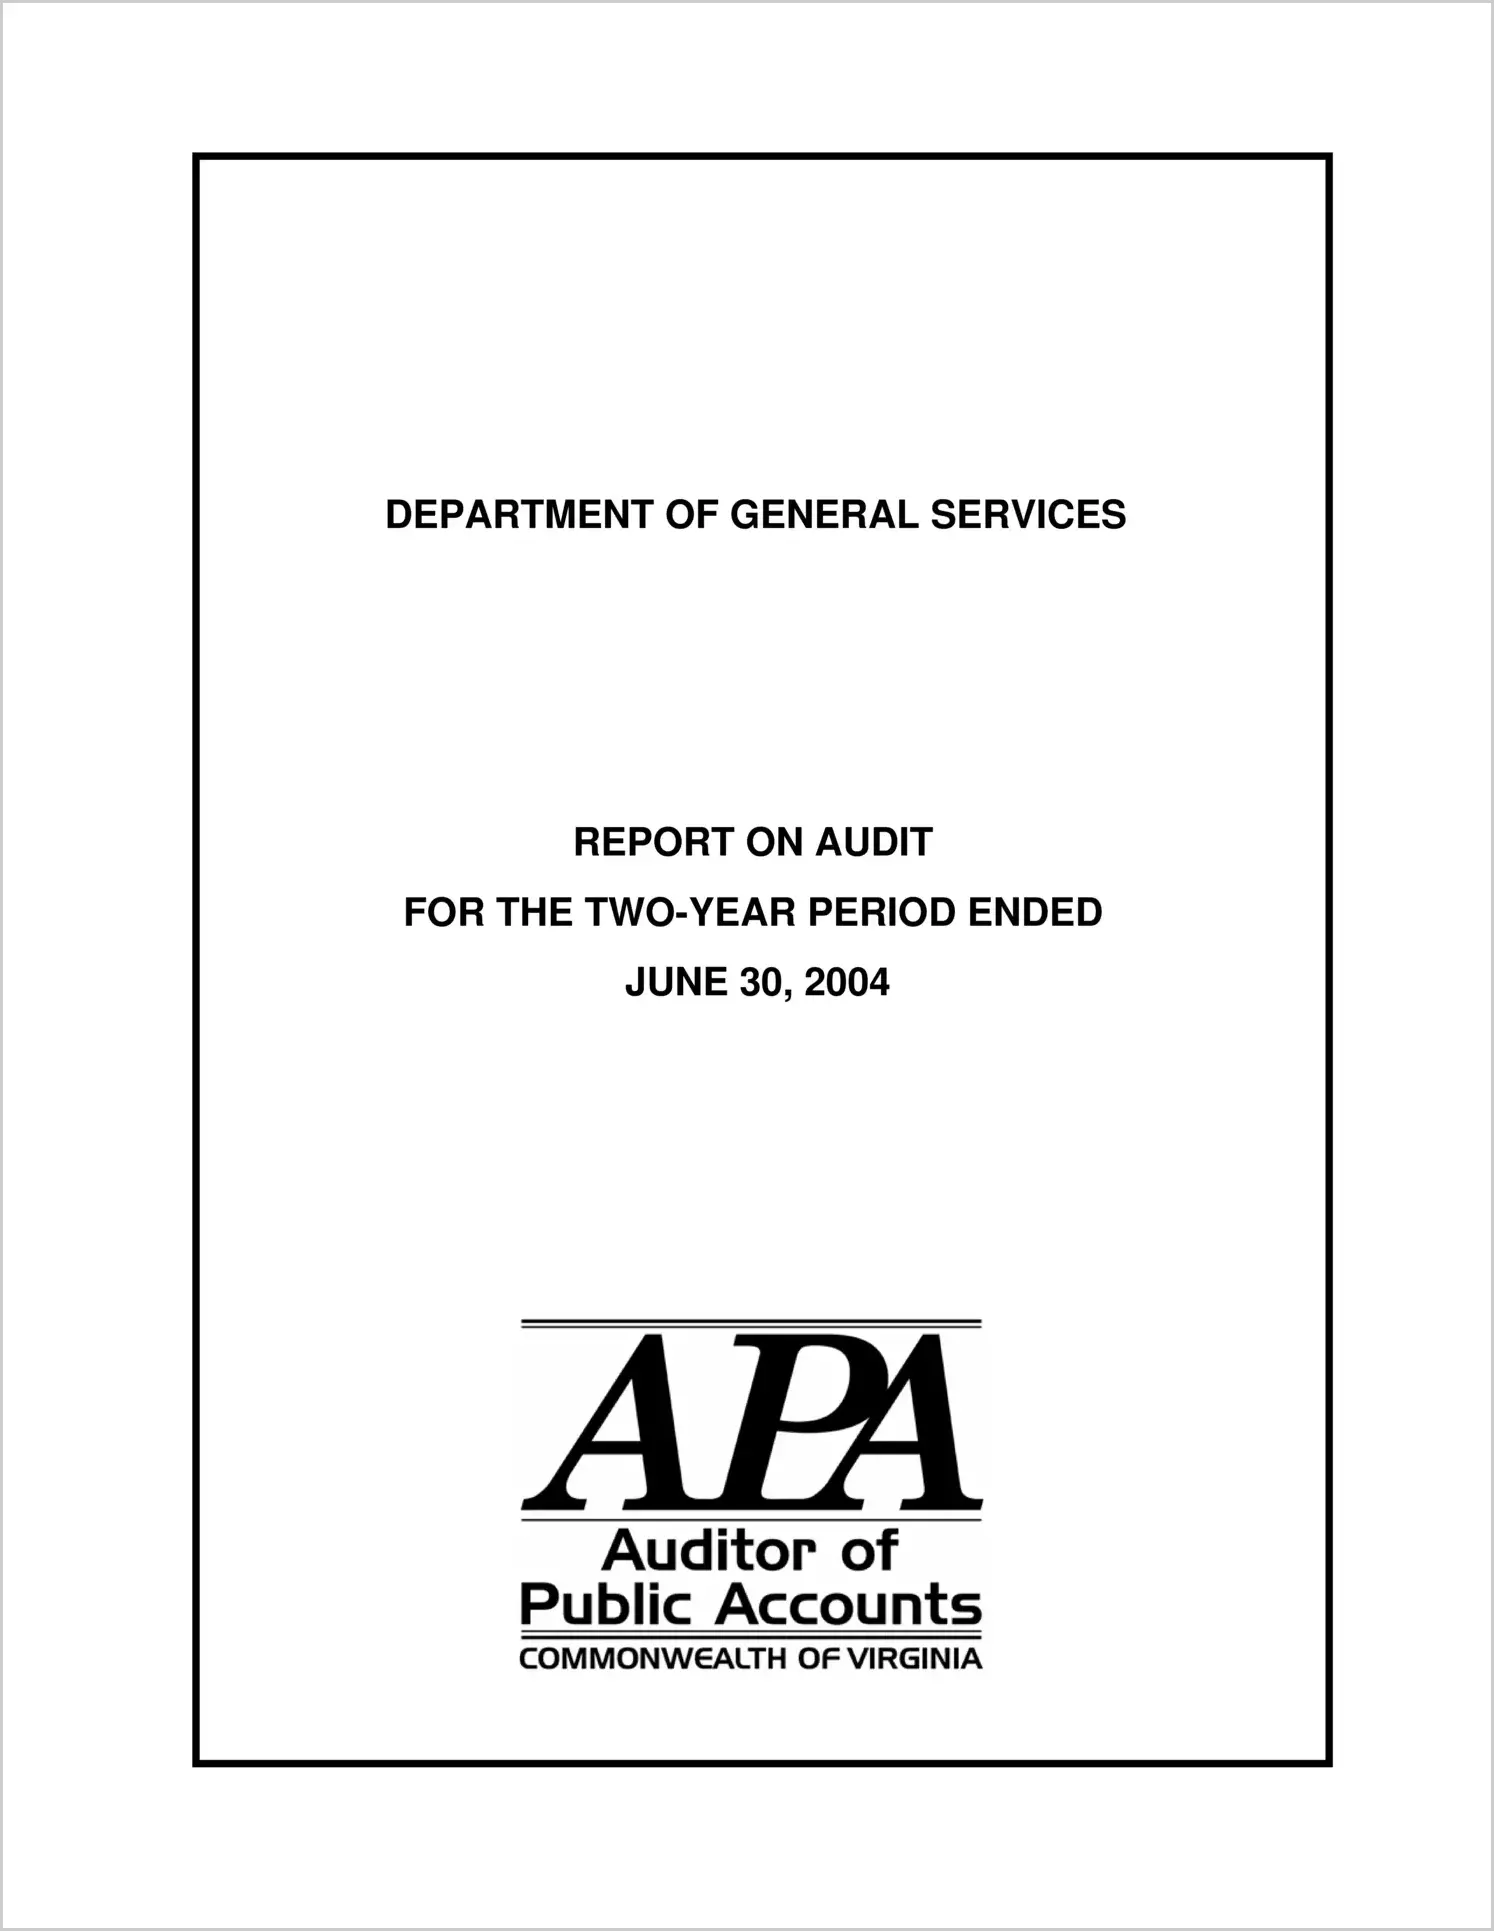 Department of General Services for the two-year period ended June 30, 12004